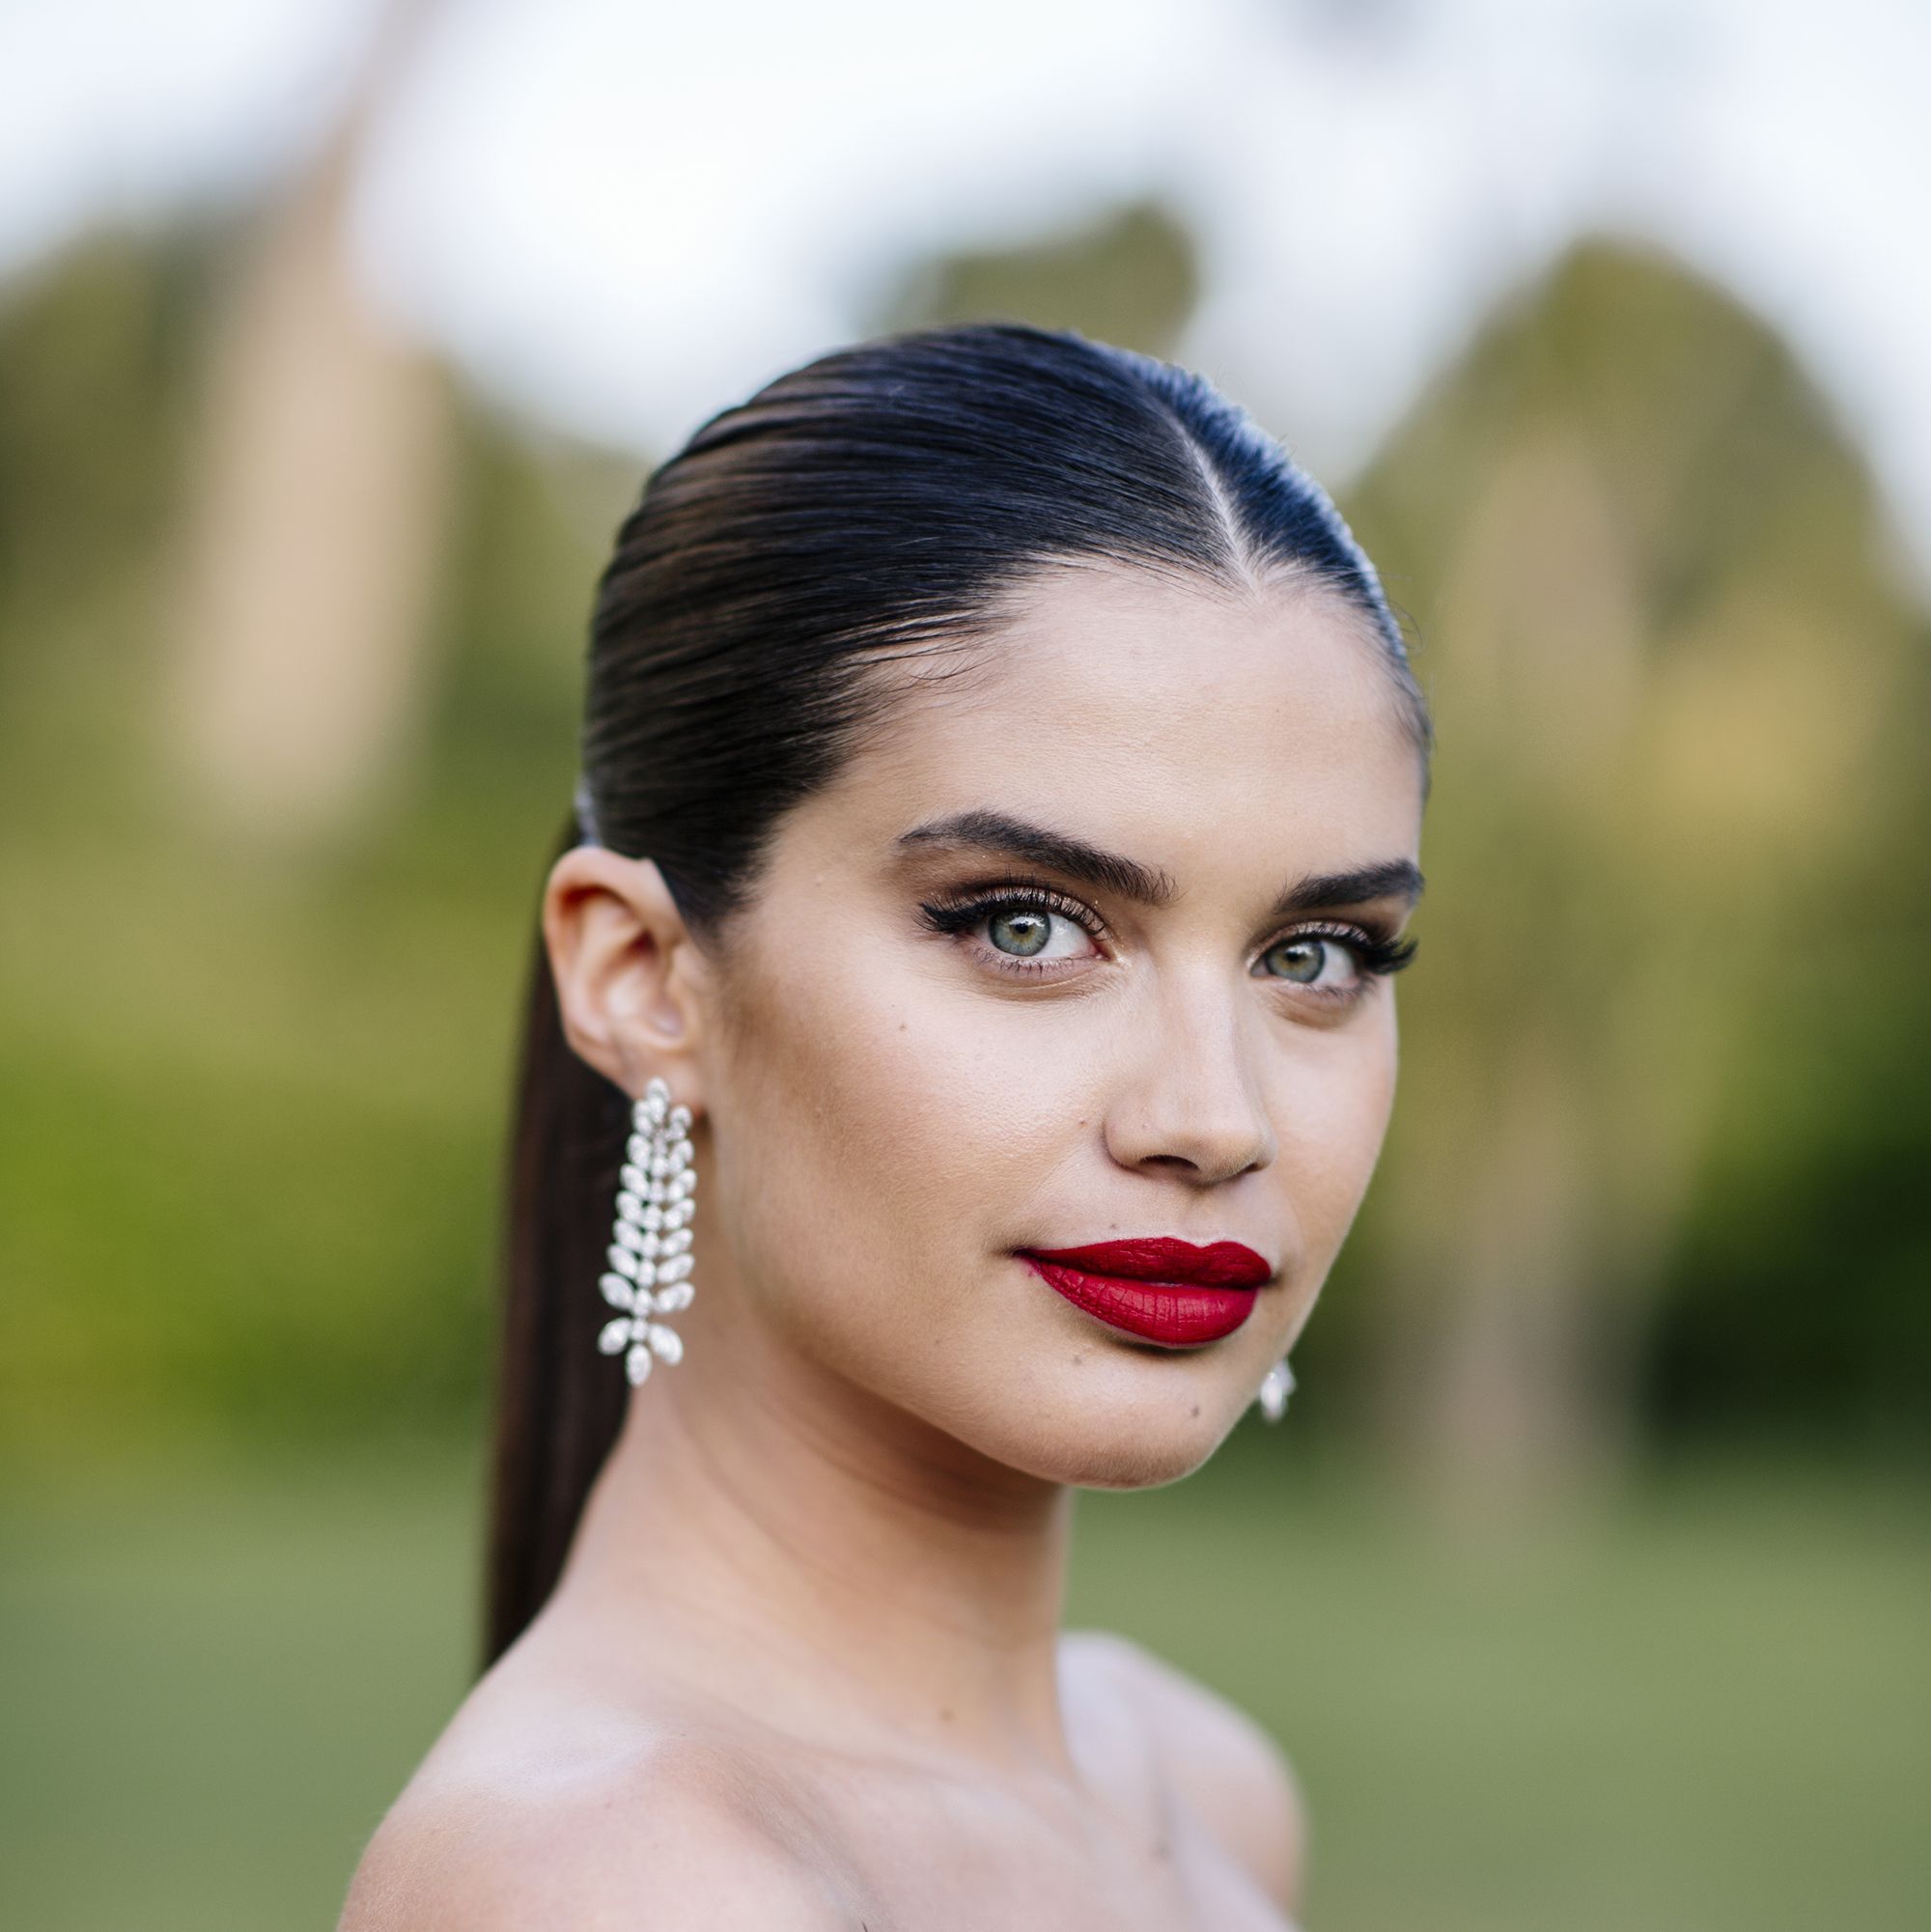 Sara Sampaio on how she handles her anxiety and depression